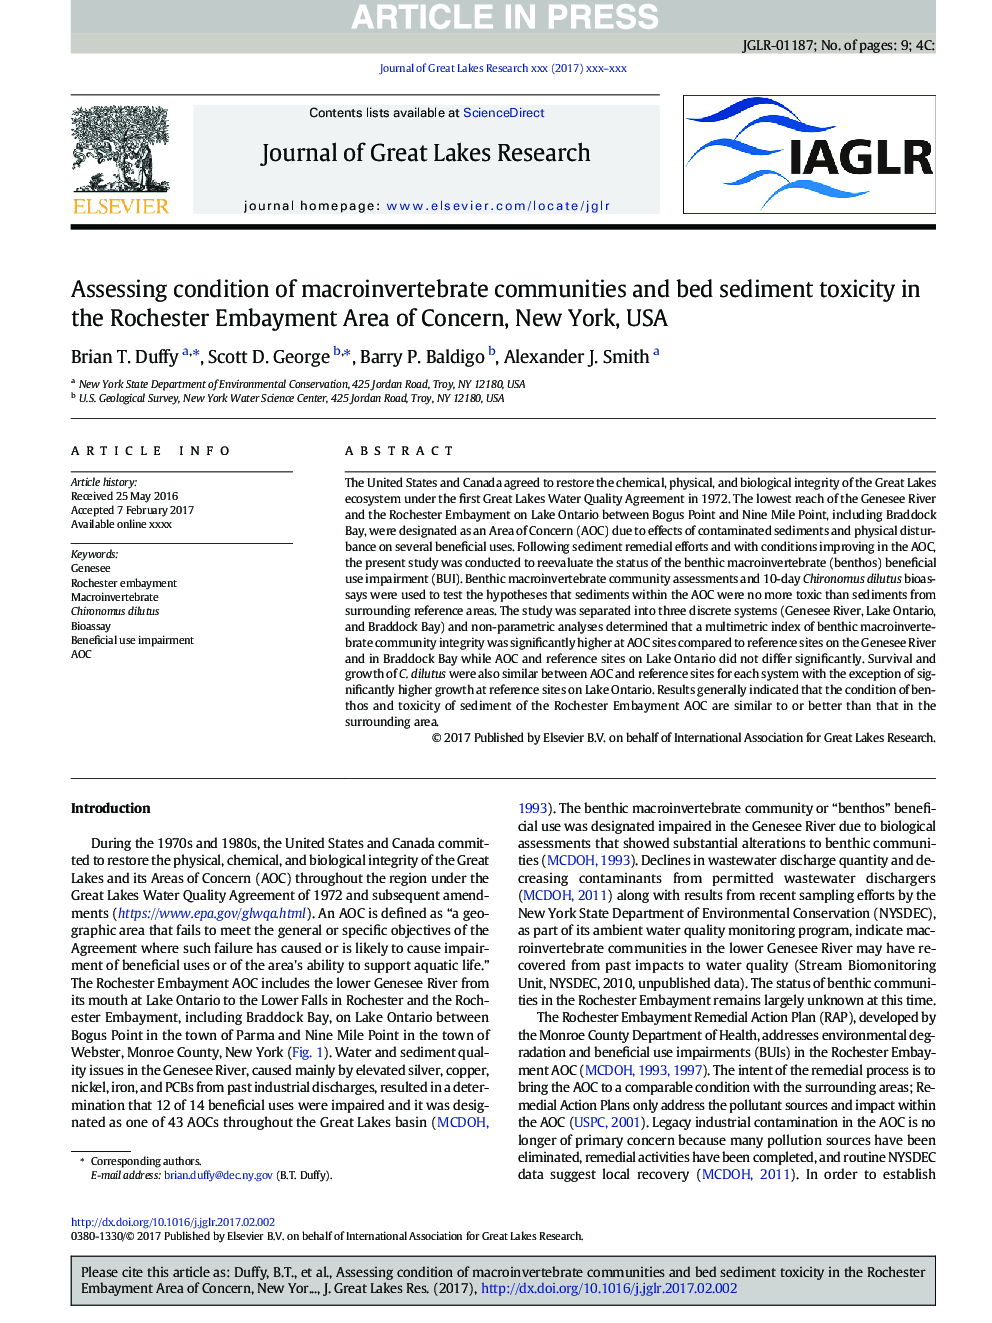 Assessing condition of macroinvertebrate communities and bed sediment toxicity in the Rochester Embayment Area of Concern, New York, USA